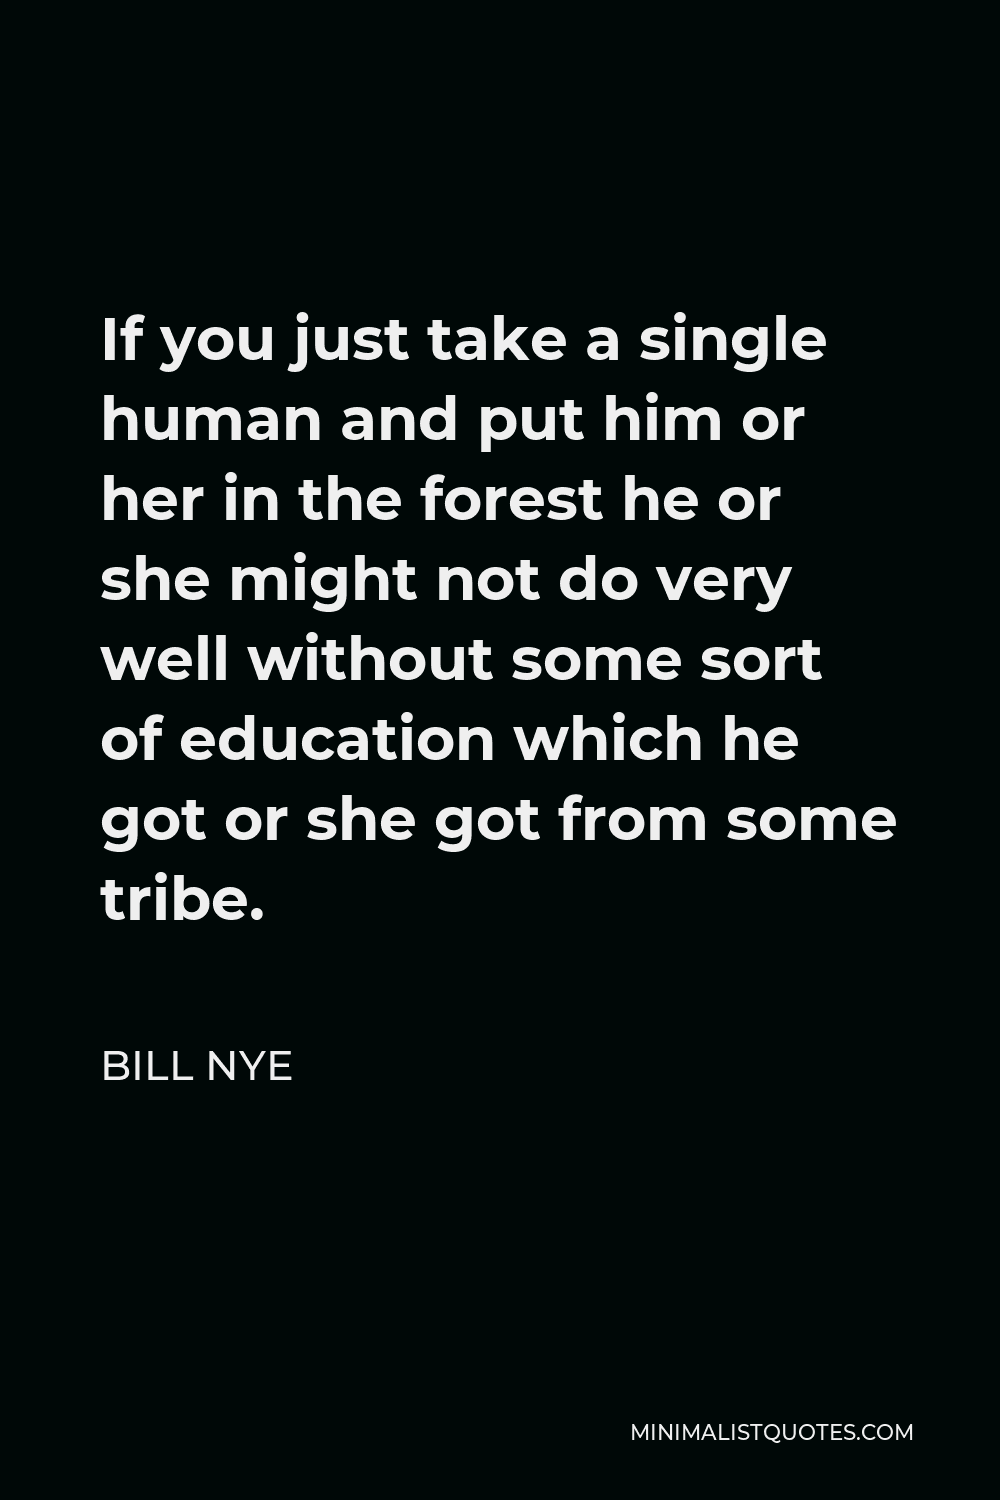 Bill Nye Quote - If you just take a single human and put him or her in the forest he or she might not do very well without some sort of education which he got or she got from some tribe.